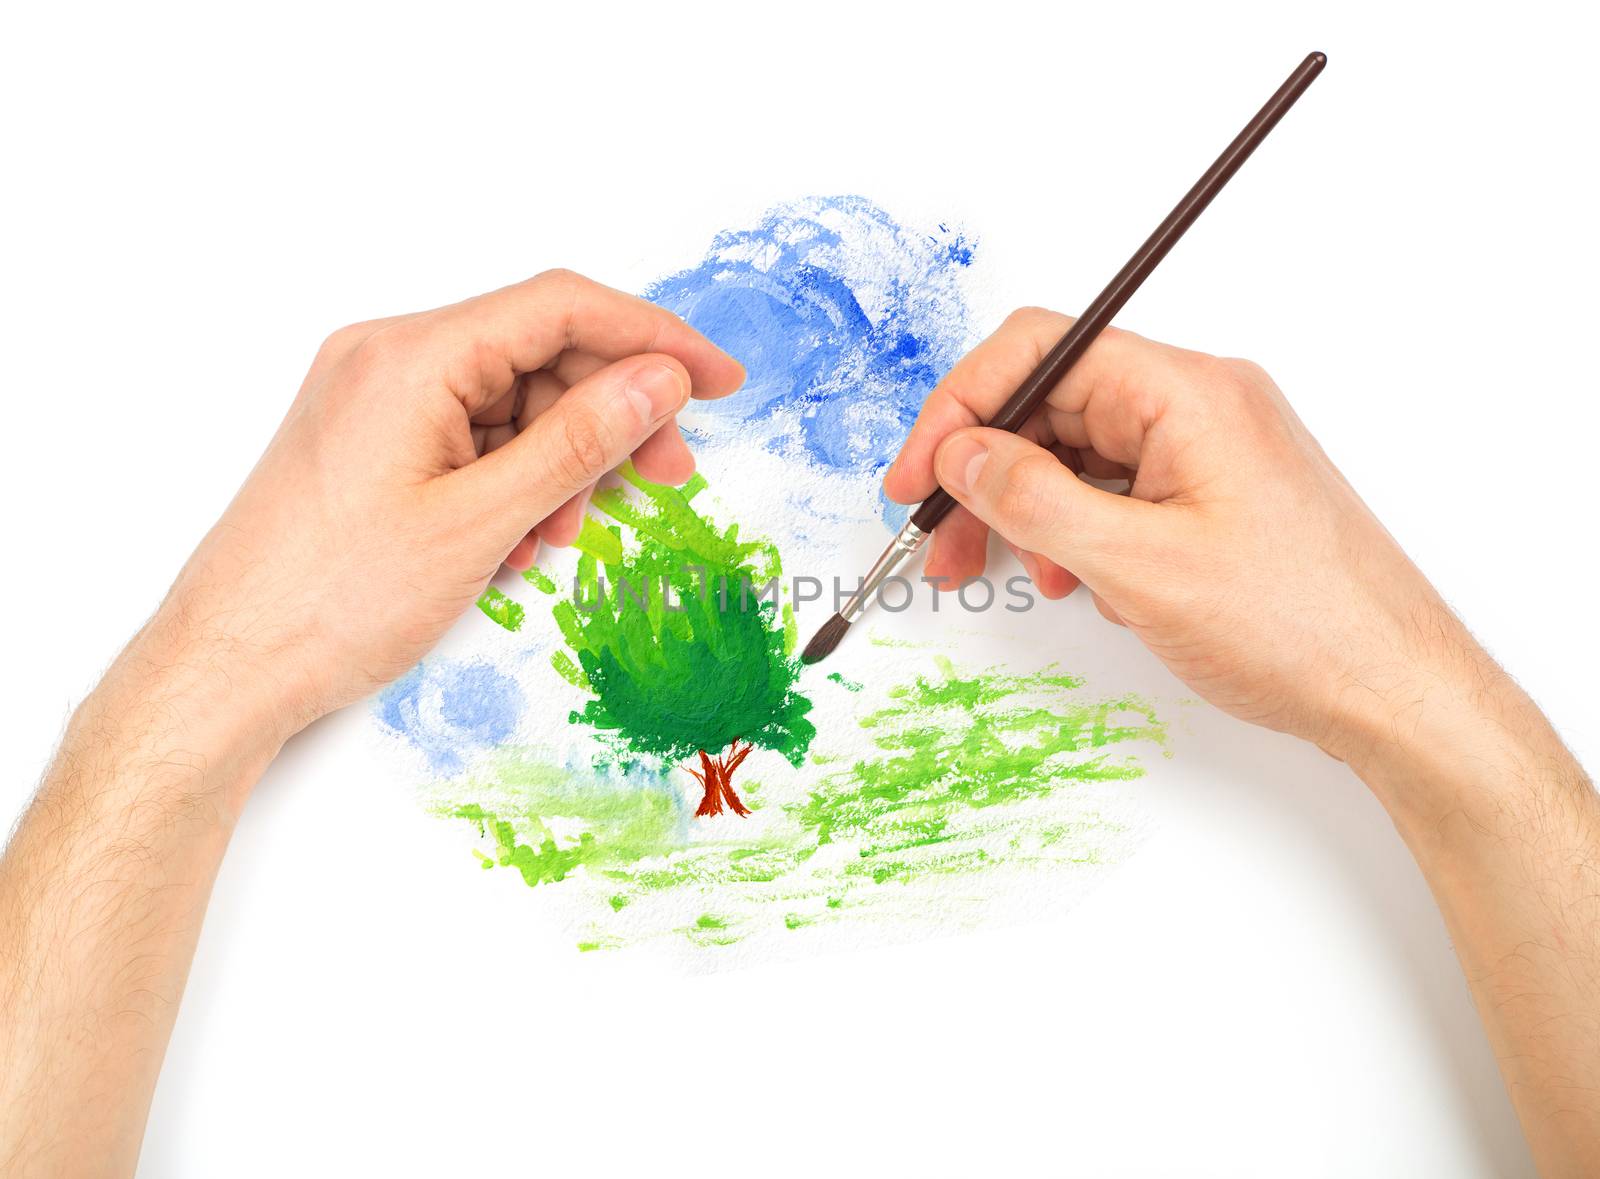 Human hands with brush painting nature landscape by vlad_star